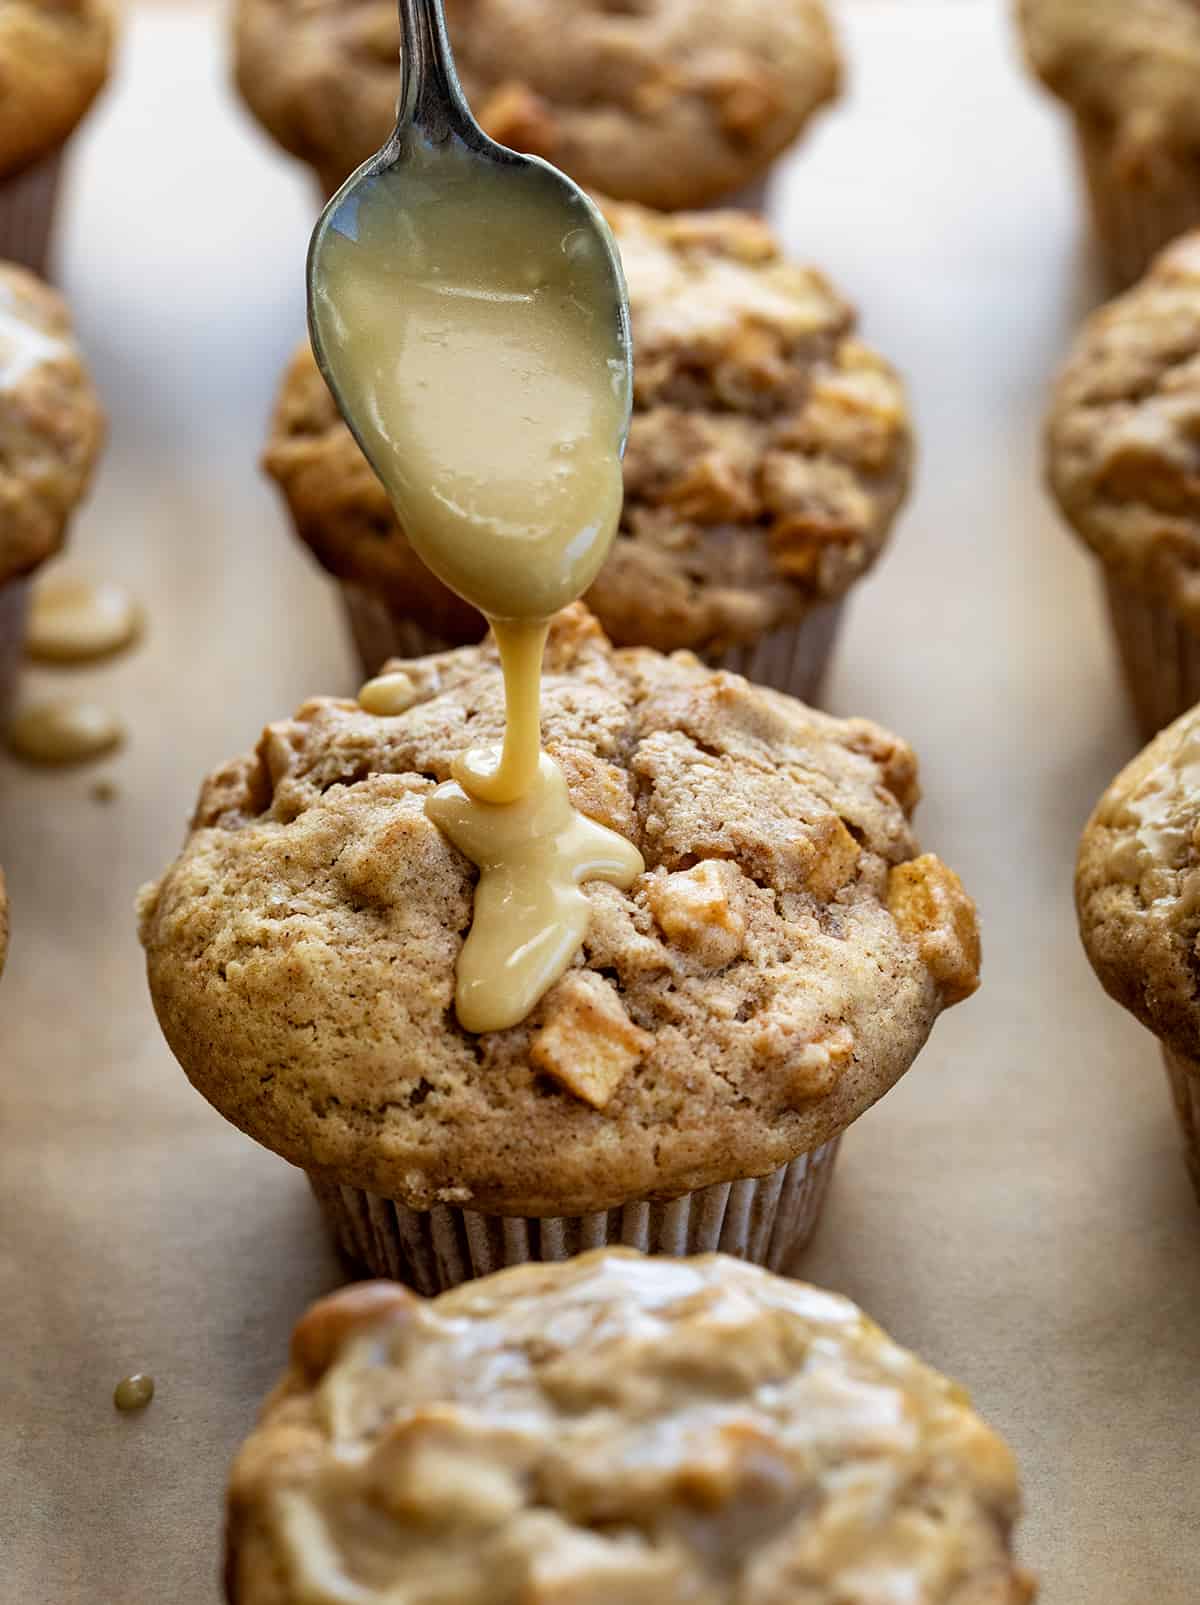 Drizzling Maple Glaze Over Freshly Baked Apple Muffins.